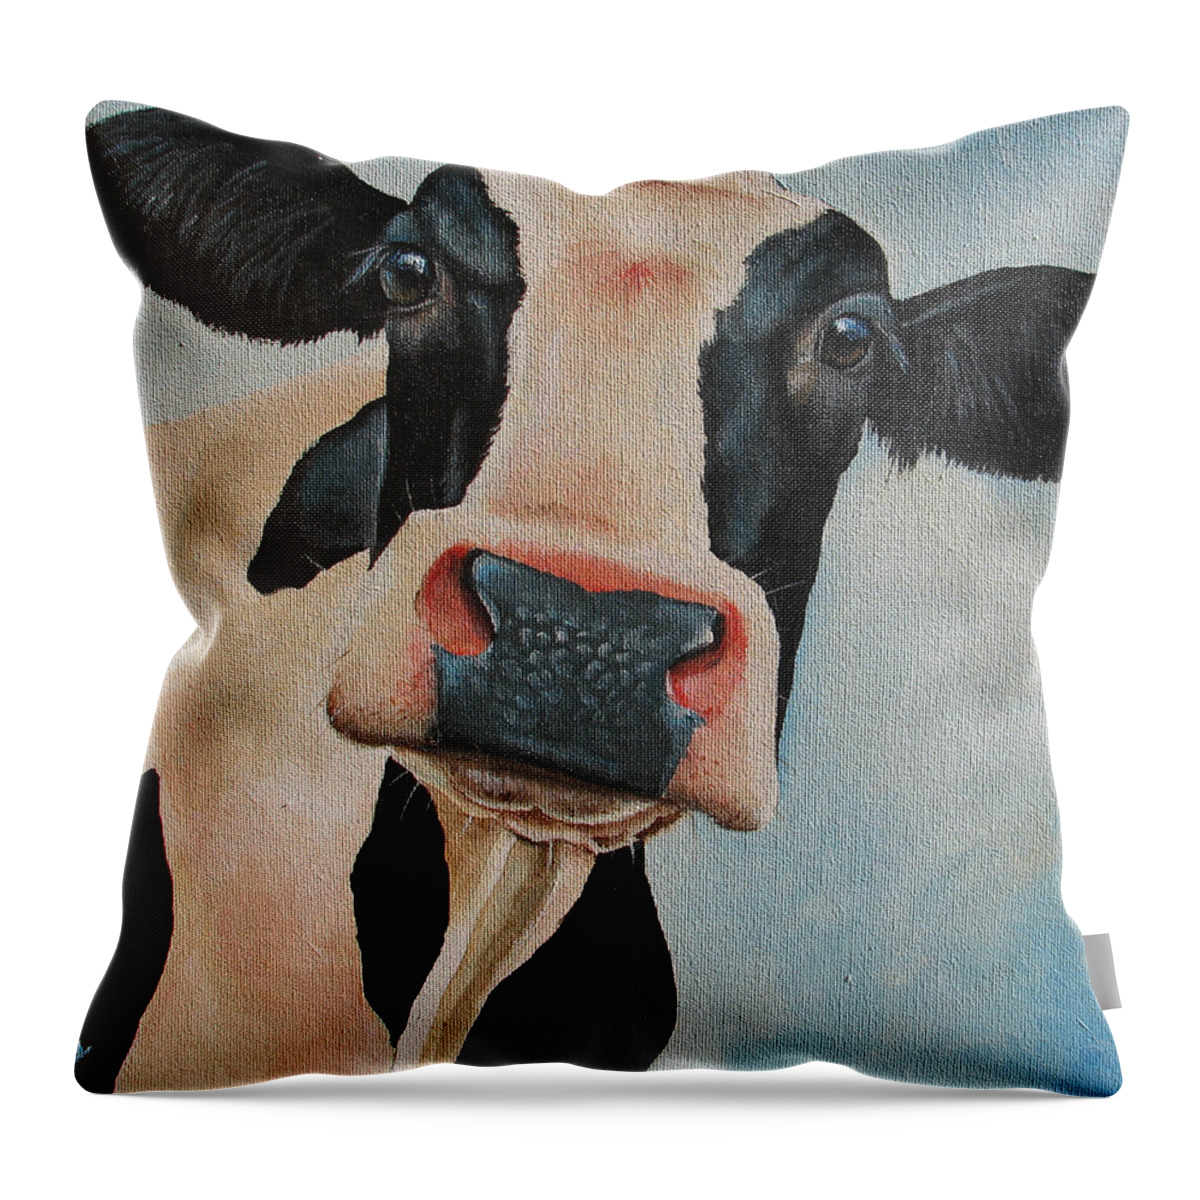 Cow Throw Pillow featuring the painting Curiosity by Laura Carey